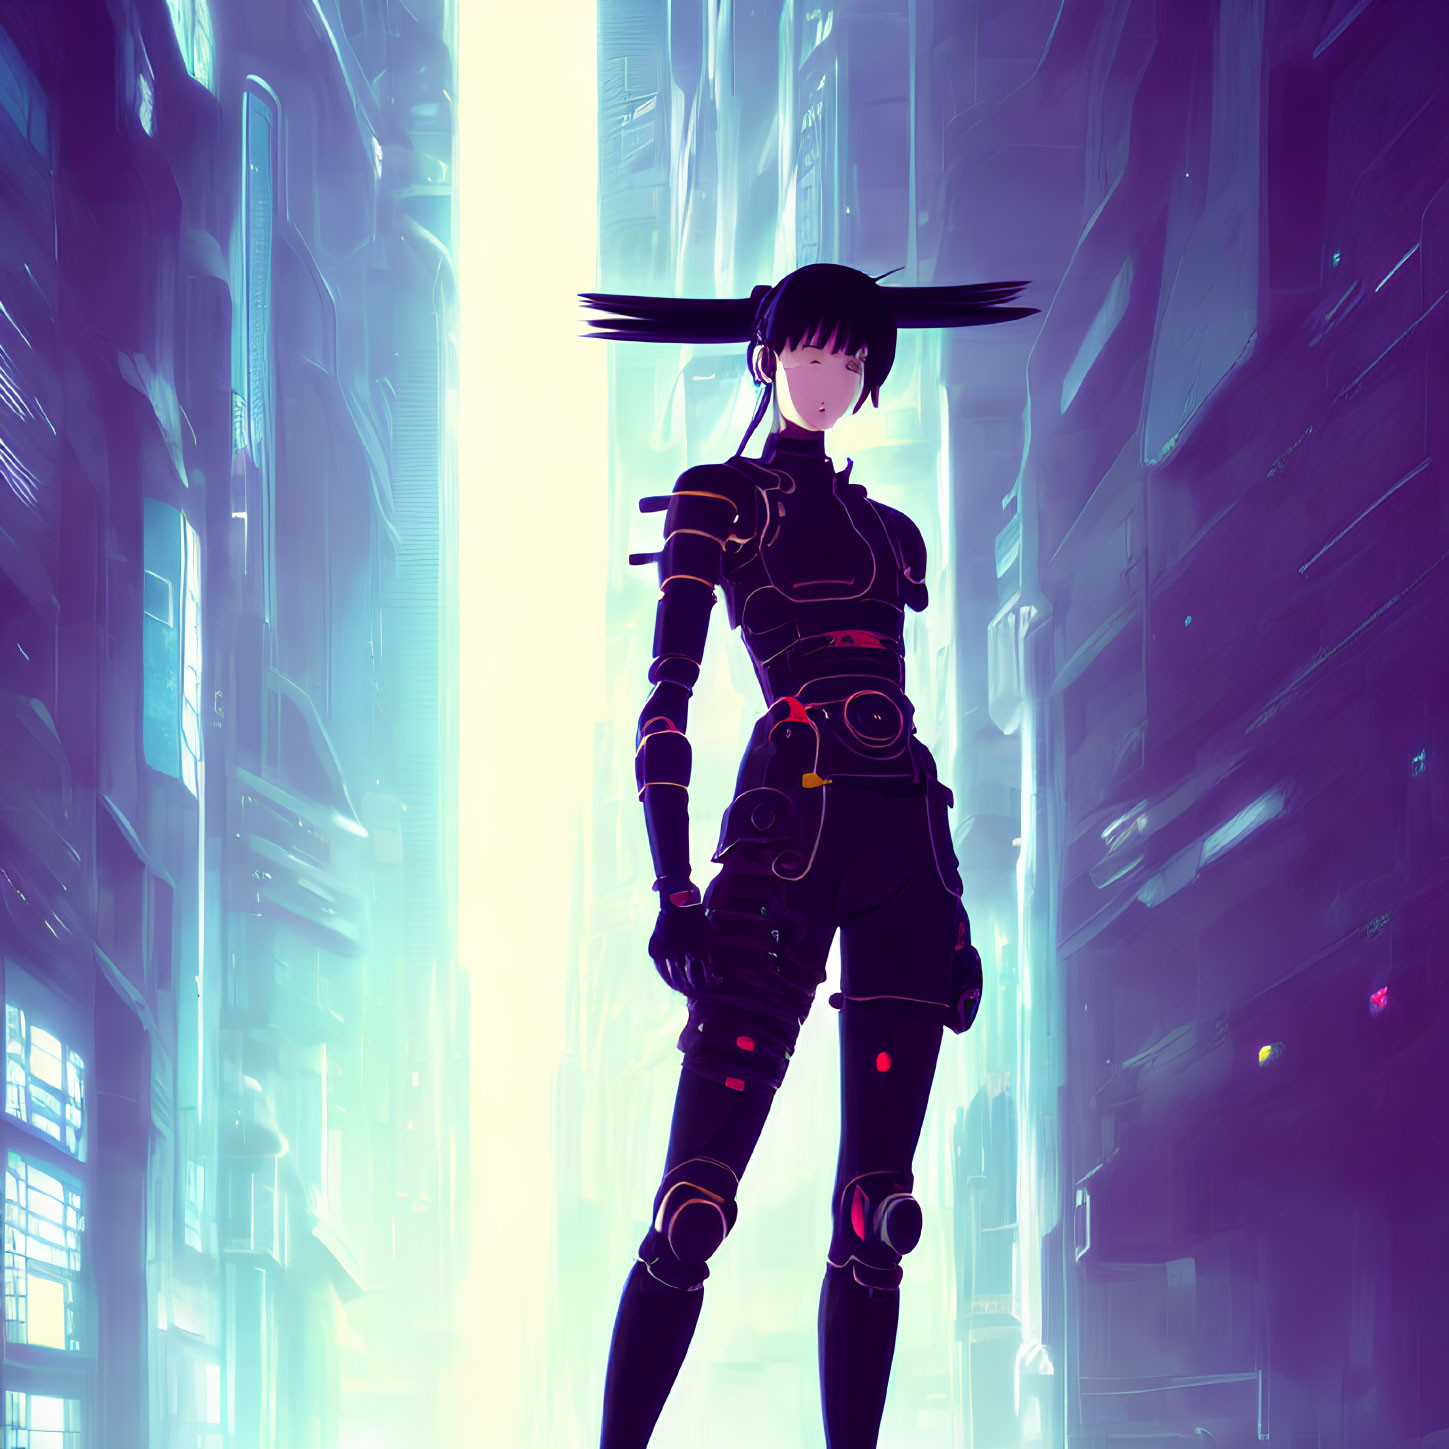 Futuristic female character in cyberpunk attire with black hair among neon-lit buildings